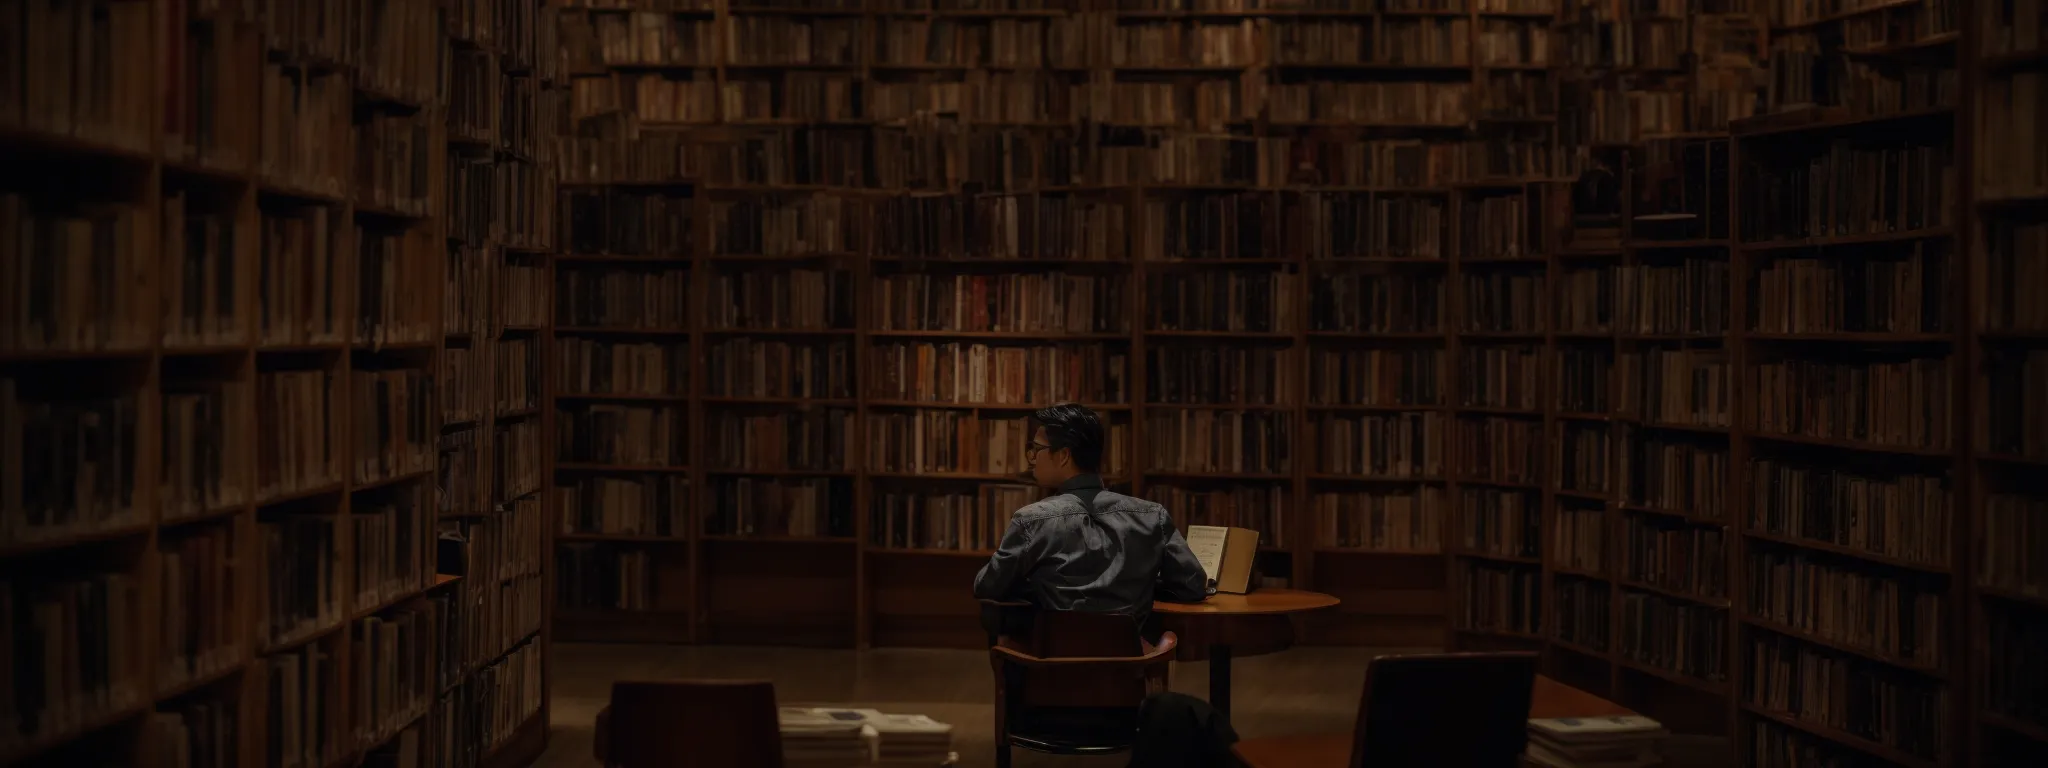 a person in a library setting surrounded by an array of books, hinting at the scholarly endeavor of mastering seo through content and keyword strategy.